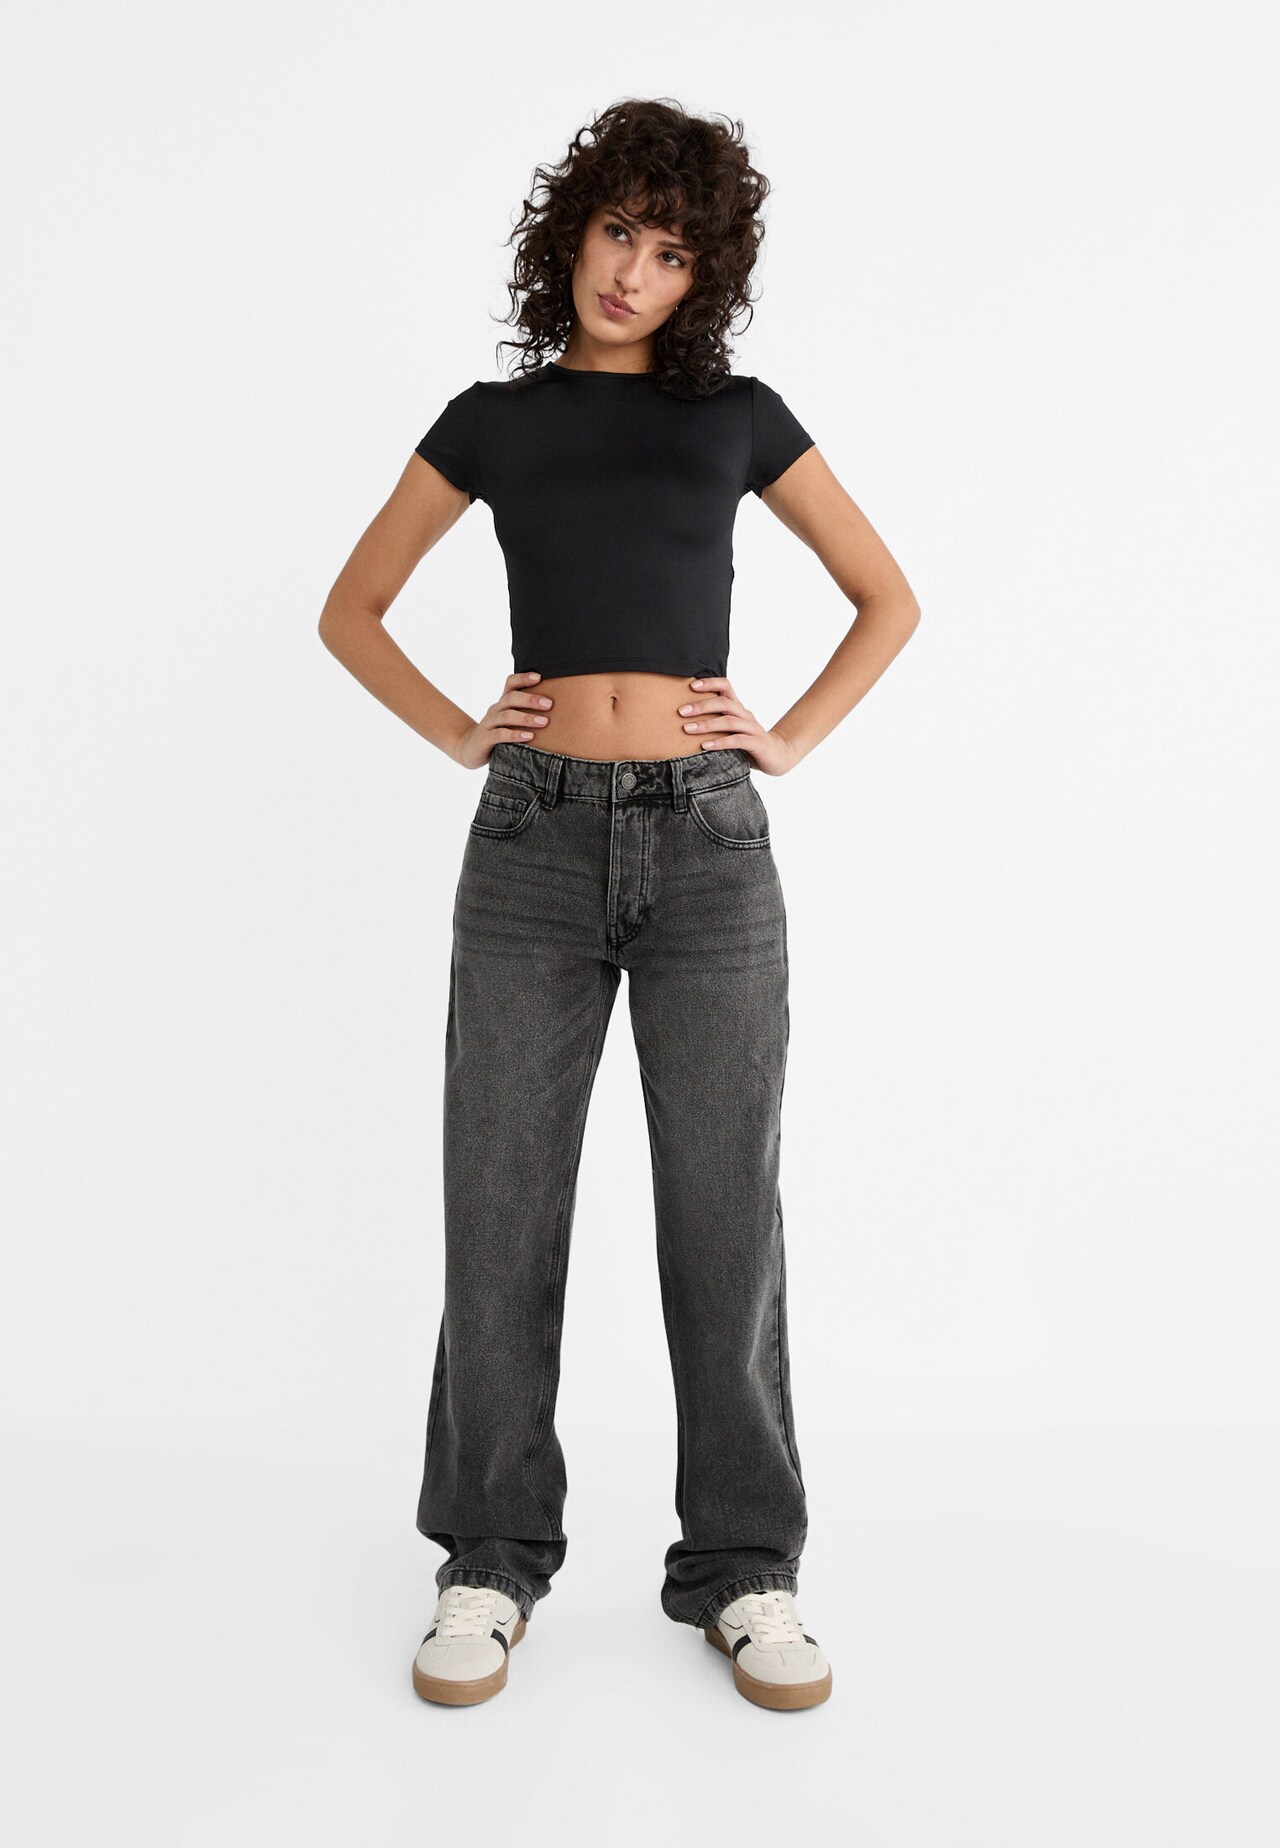 Buy Vintage Jeans & Jeggings for Women by I Saw It First Online